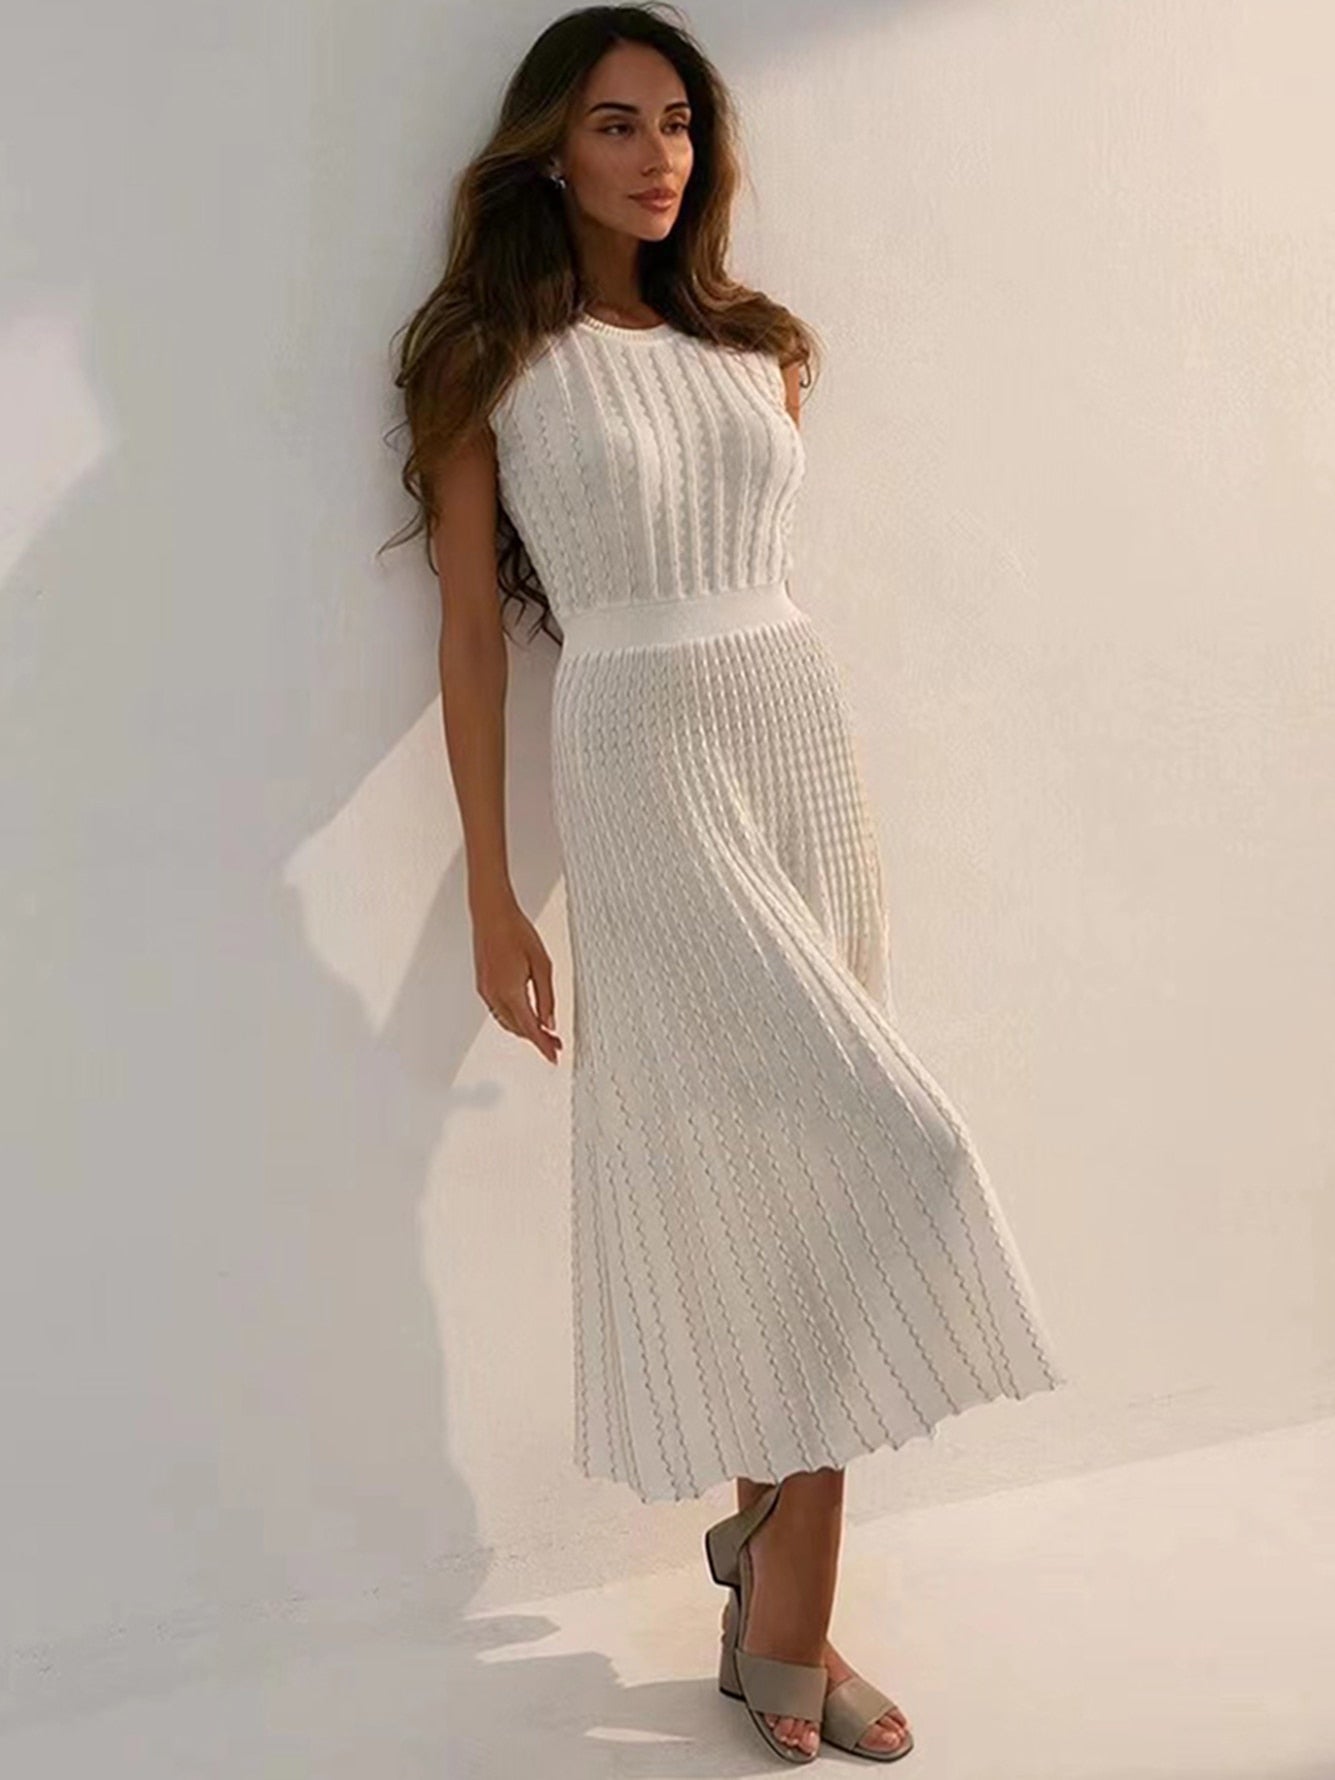 Clacive Vintage Knitted Dress For Women O Collar Draped Sleeveless High Waist Knit Midi A Line Dresses Female  Spring Fashion New